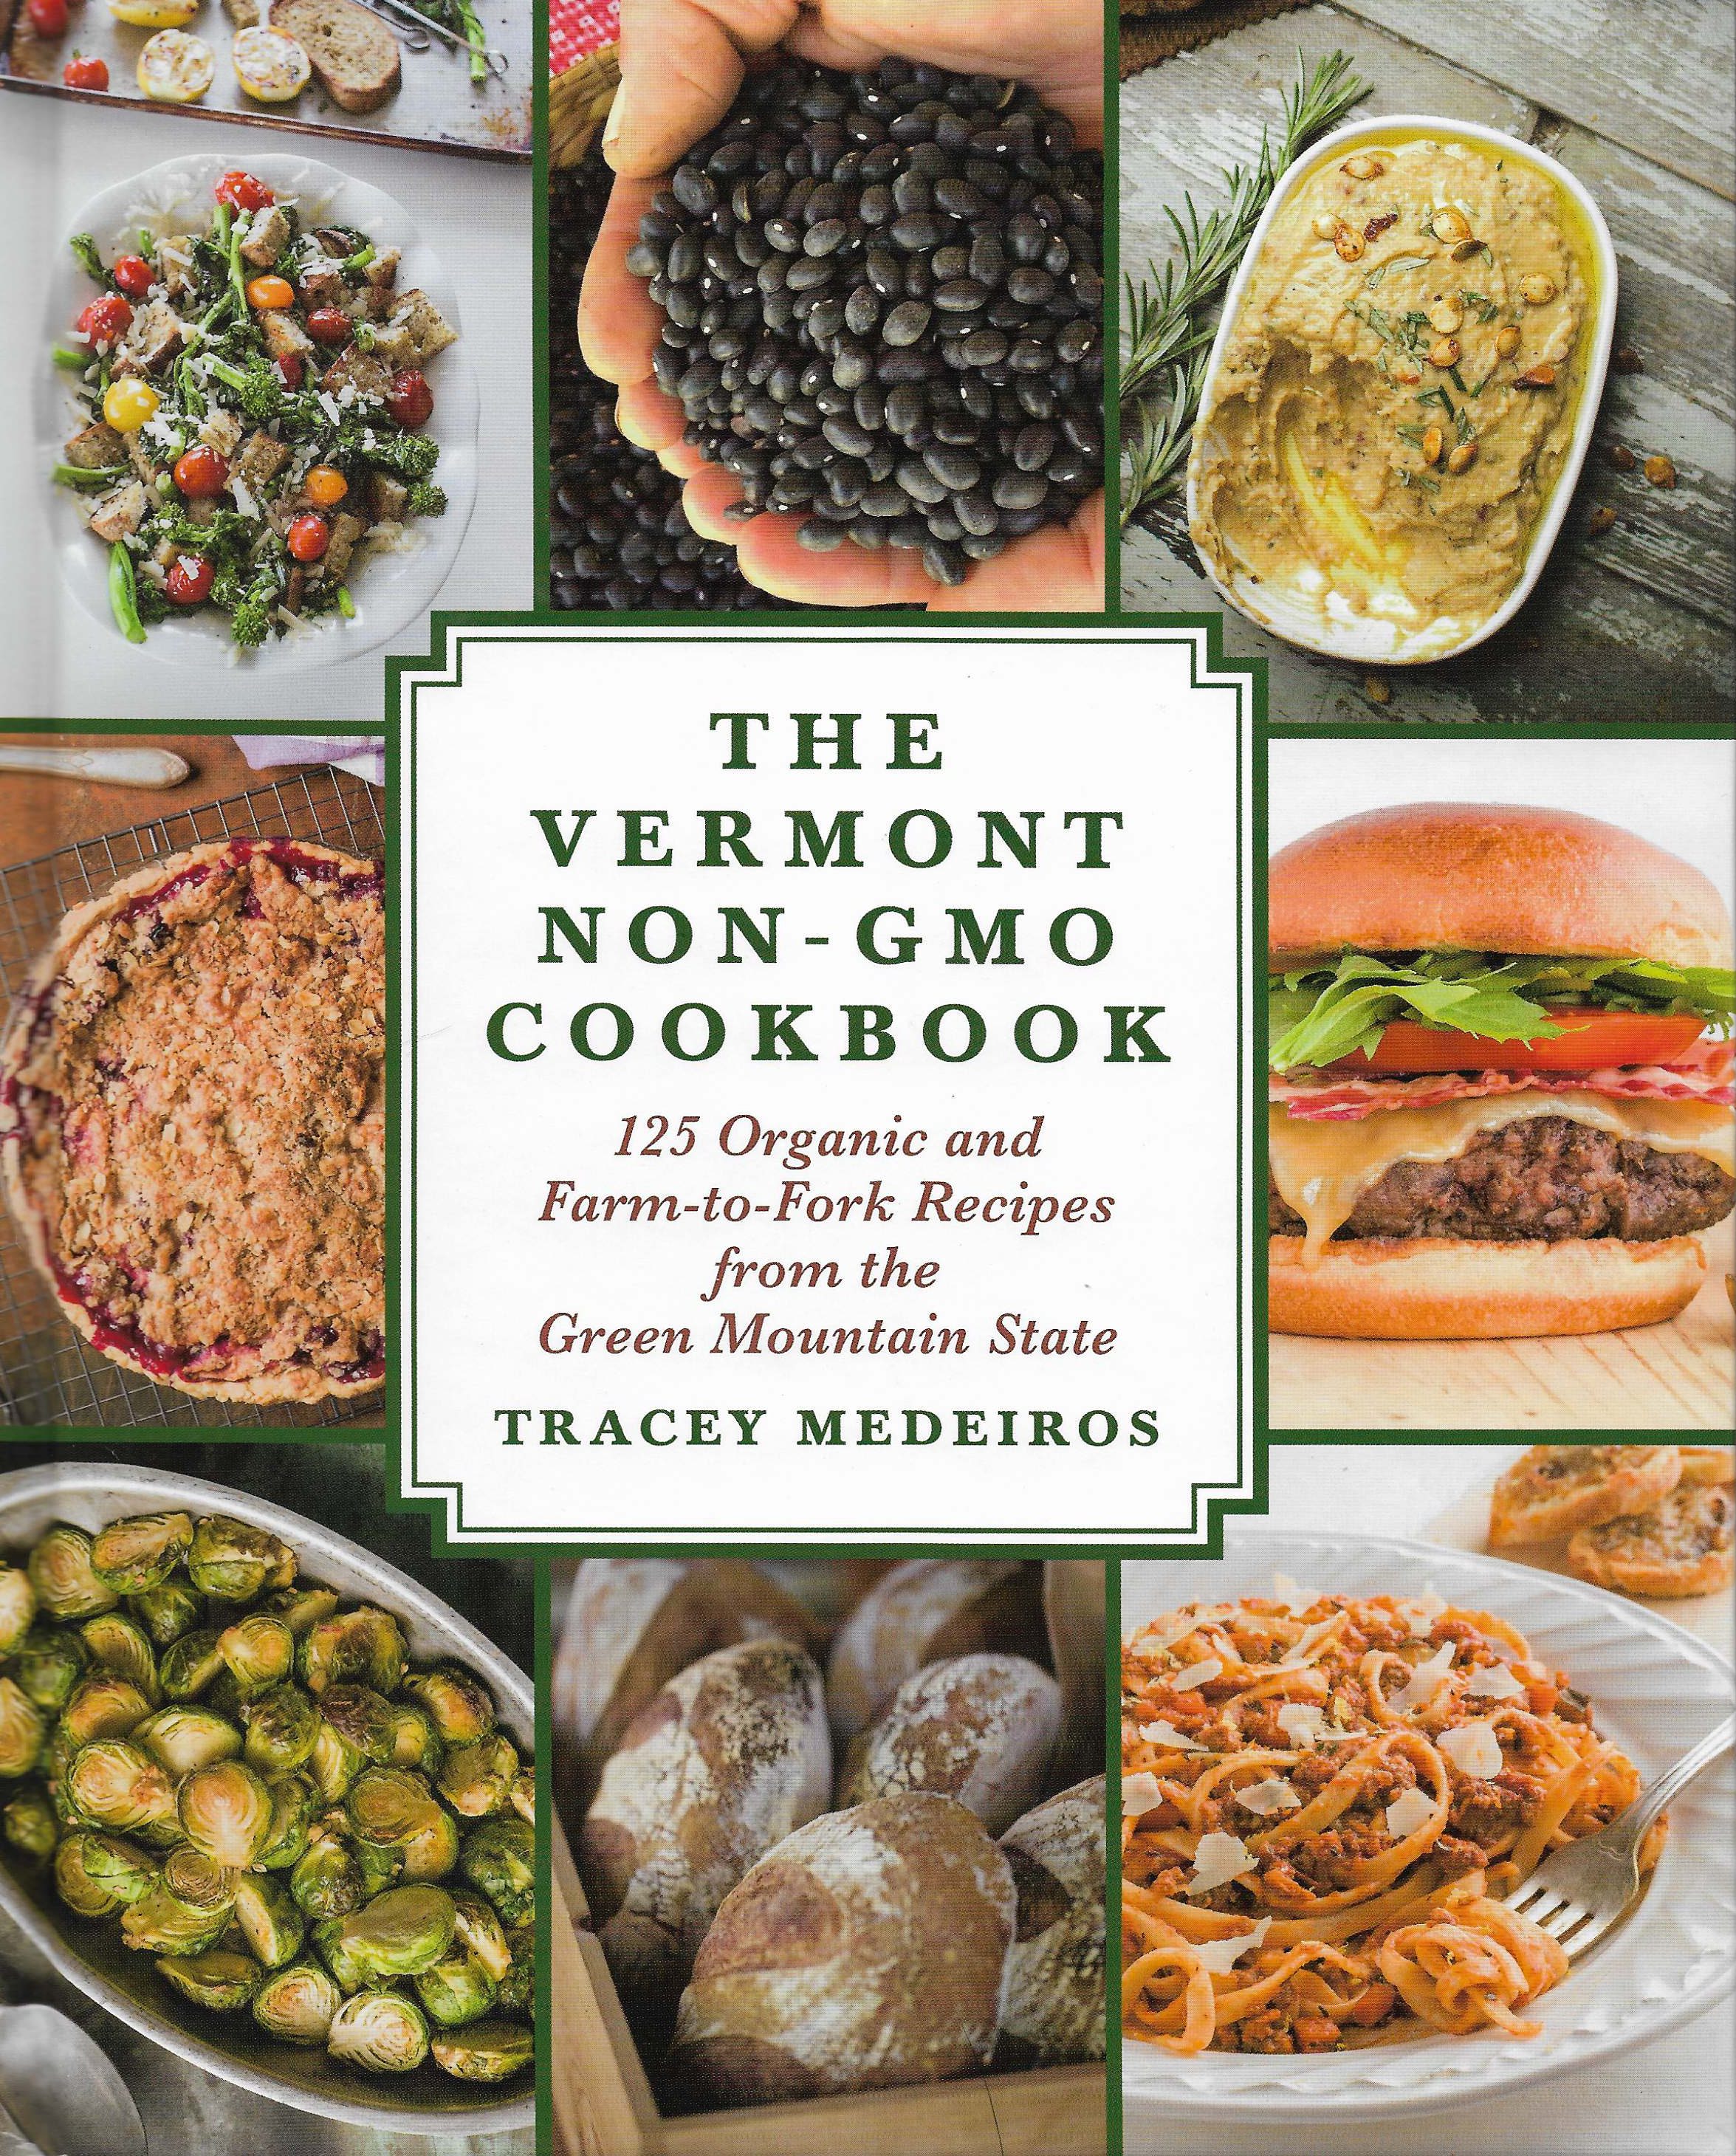 Appetite for Books | cookbook reviews and food adventures